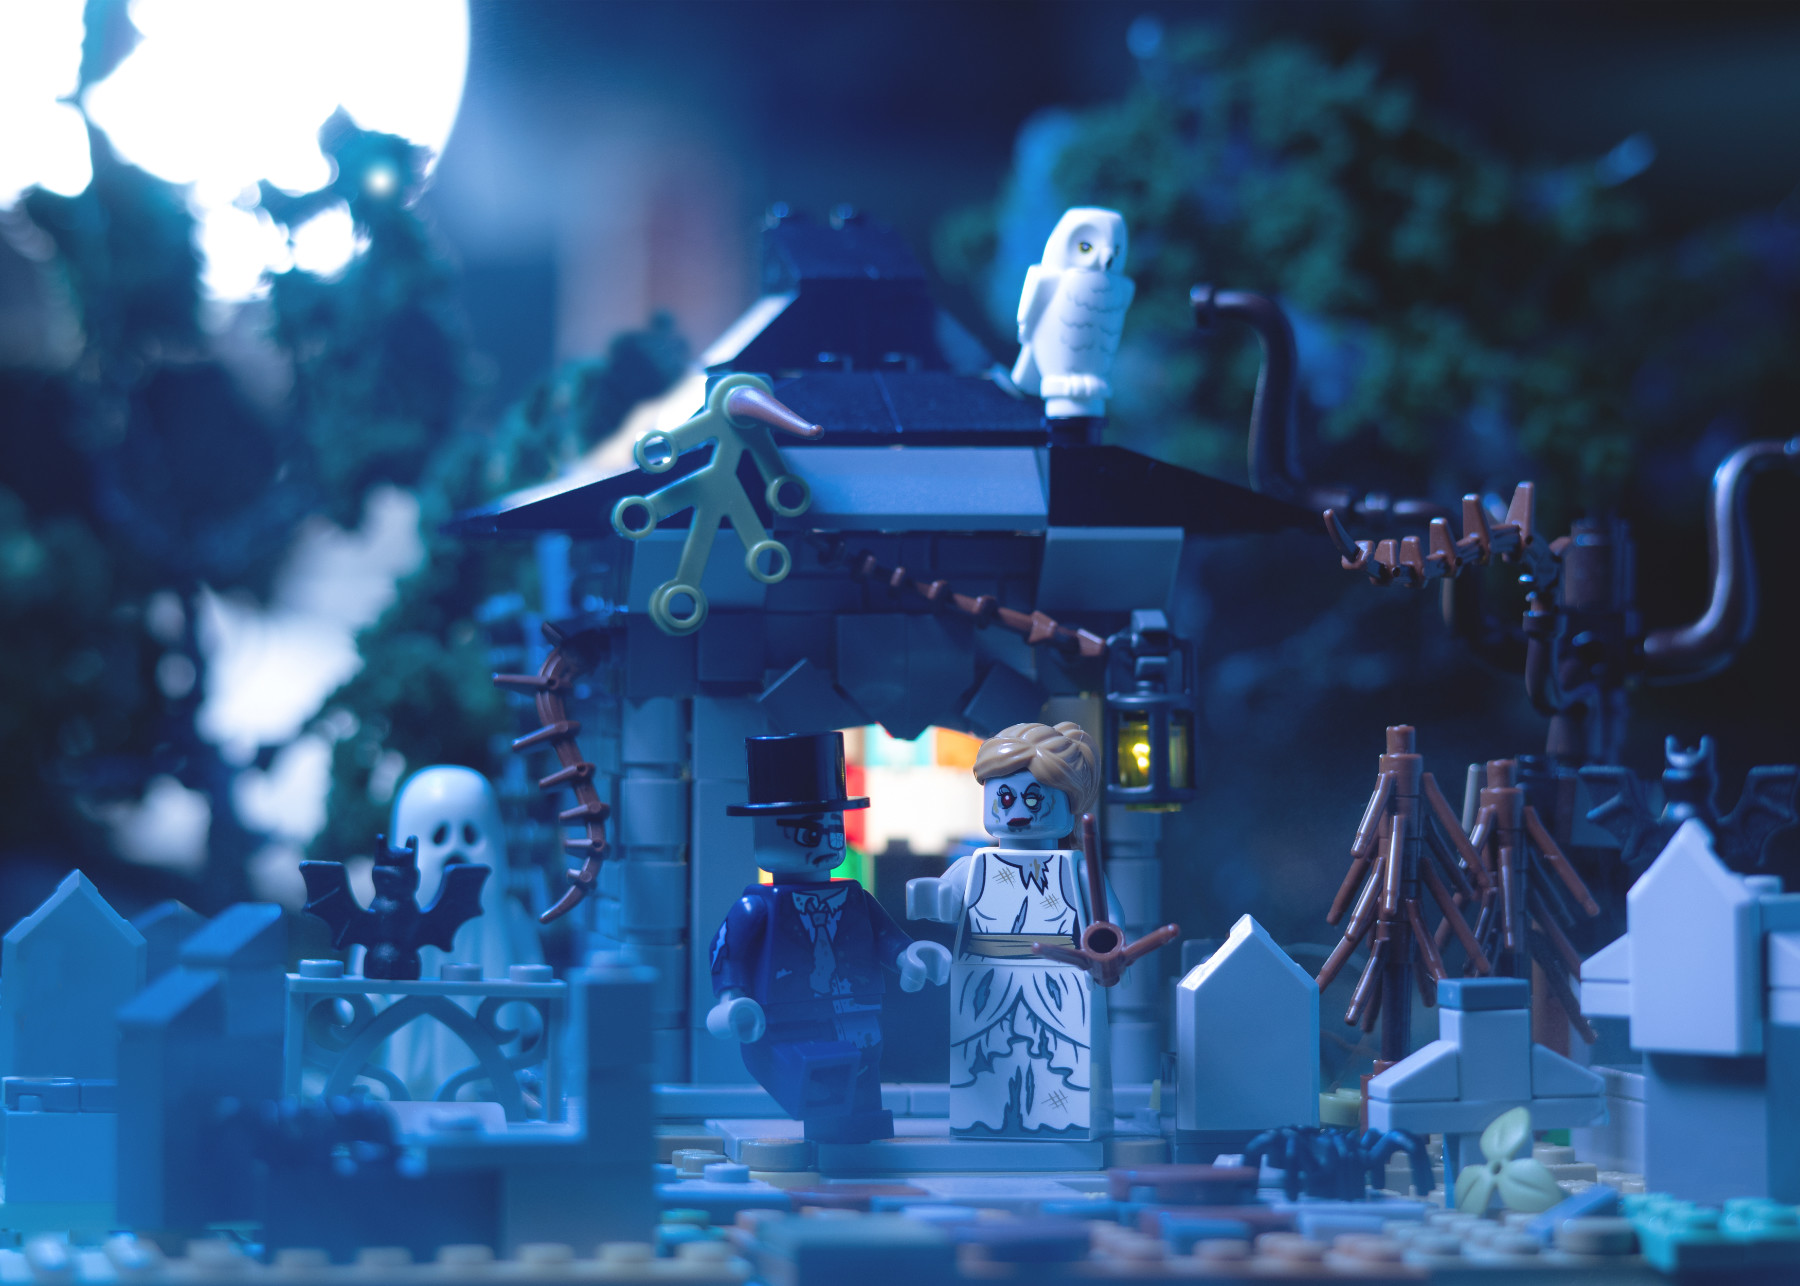 Nightmare Before Christmas - BrickNerd - All things LEGO and the LEGO fan  community